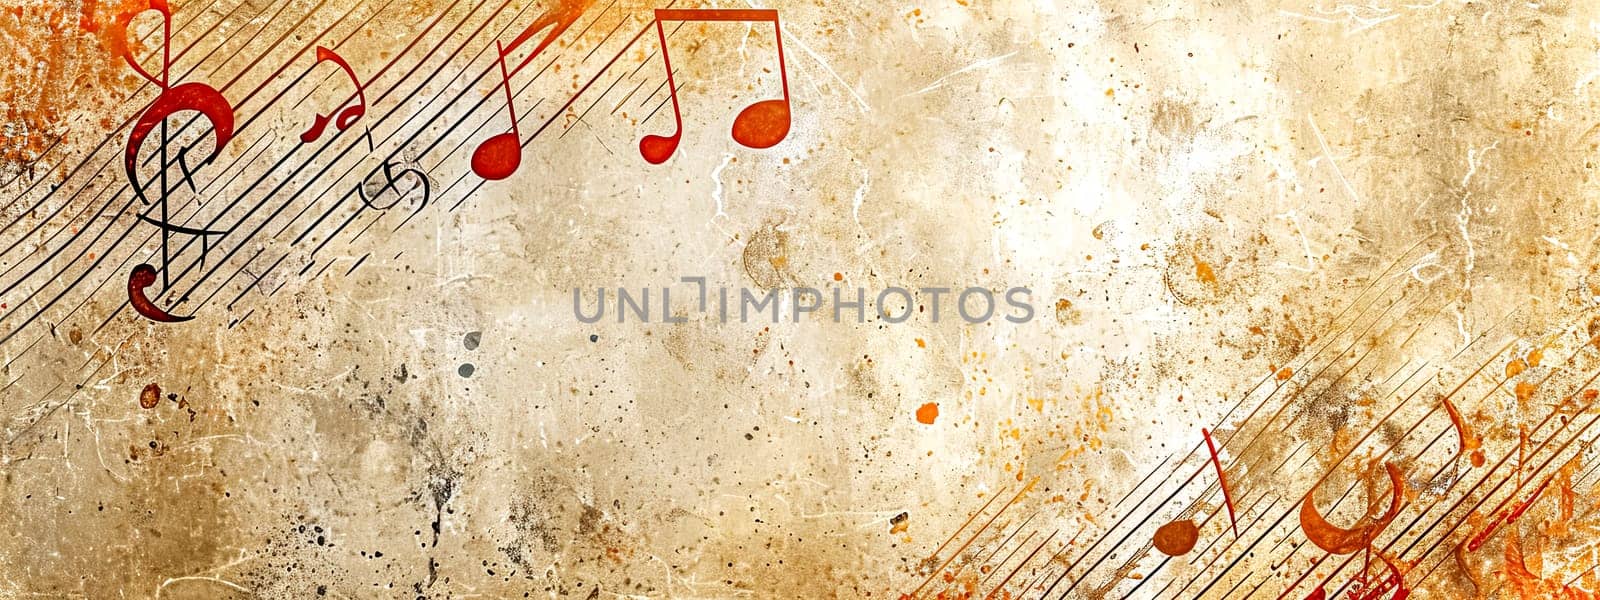 creative fusion of musical notes and staff lines superimposed on an aged, textured background, giving the impression of music frozen in time or an ancient musical manuscript by Edophoto